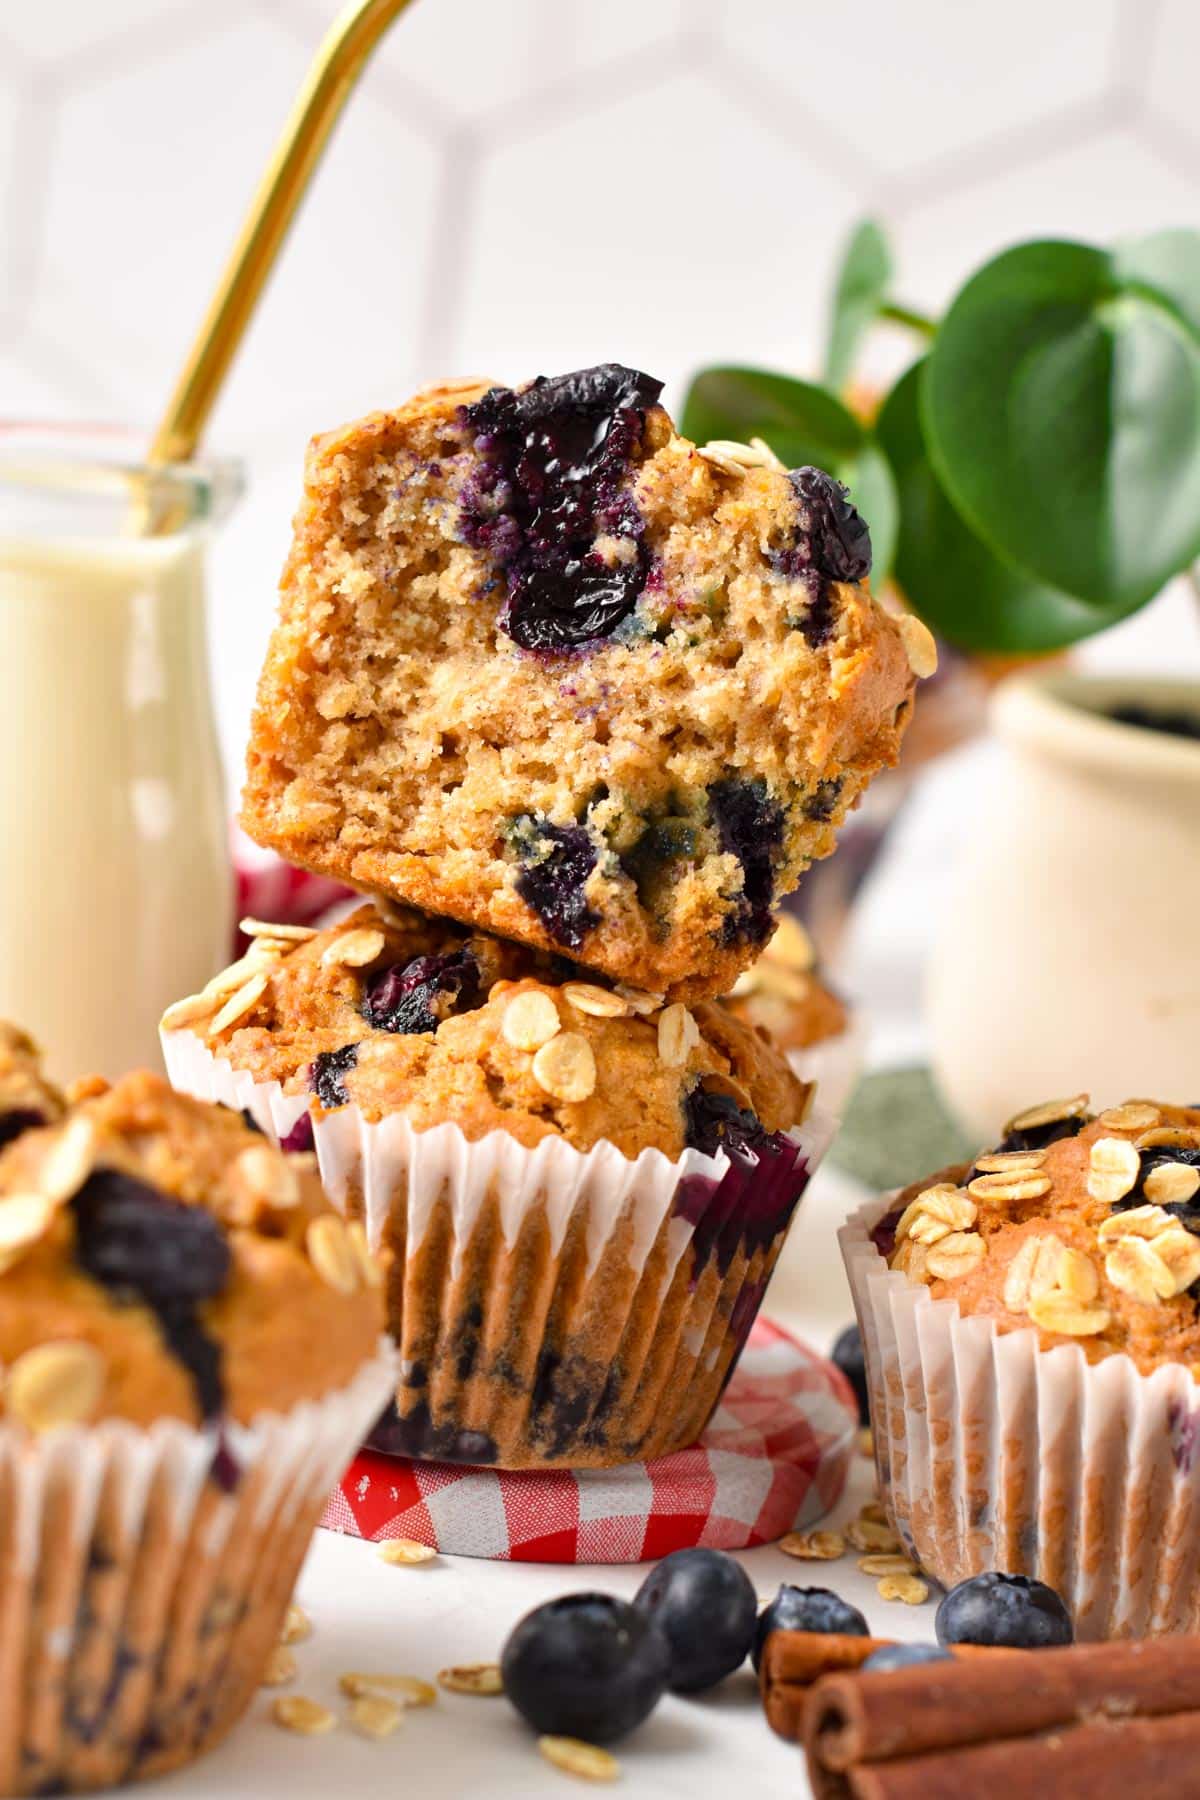 A stack of two vegan blueberry oatmeal muffins with the one on top half eaten showing the inside fluffy texture.